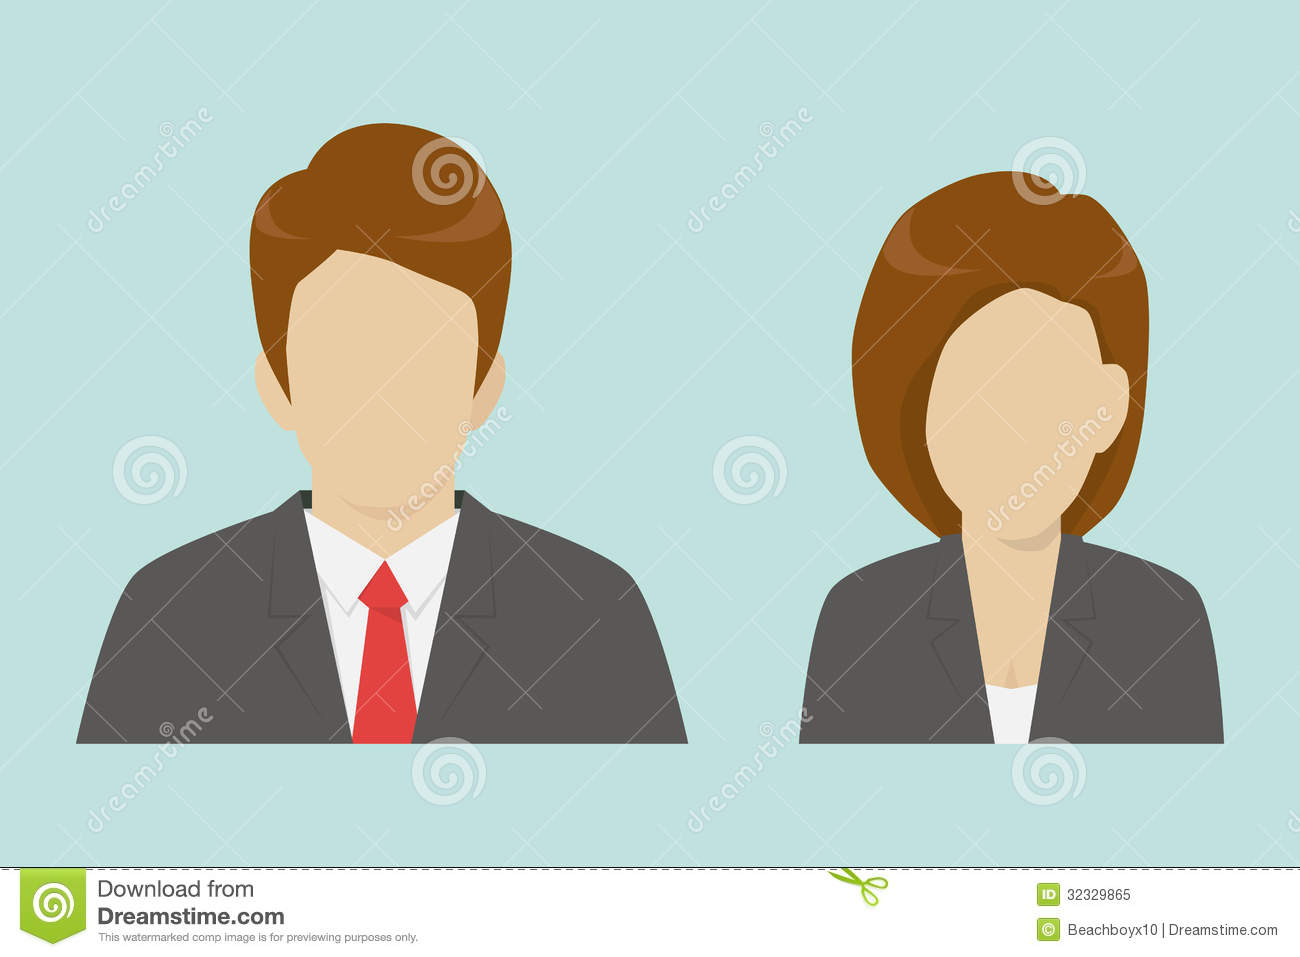 Male And Female Business Icons Royalty Free Stock Photo   Image